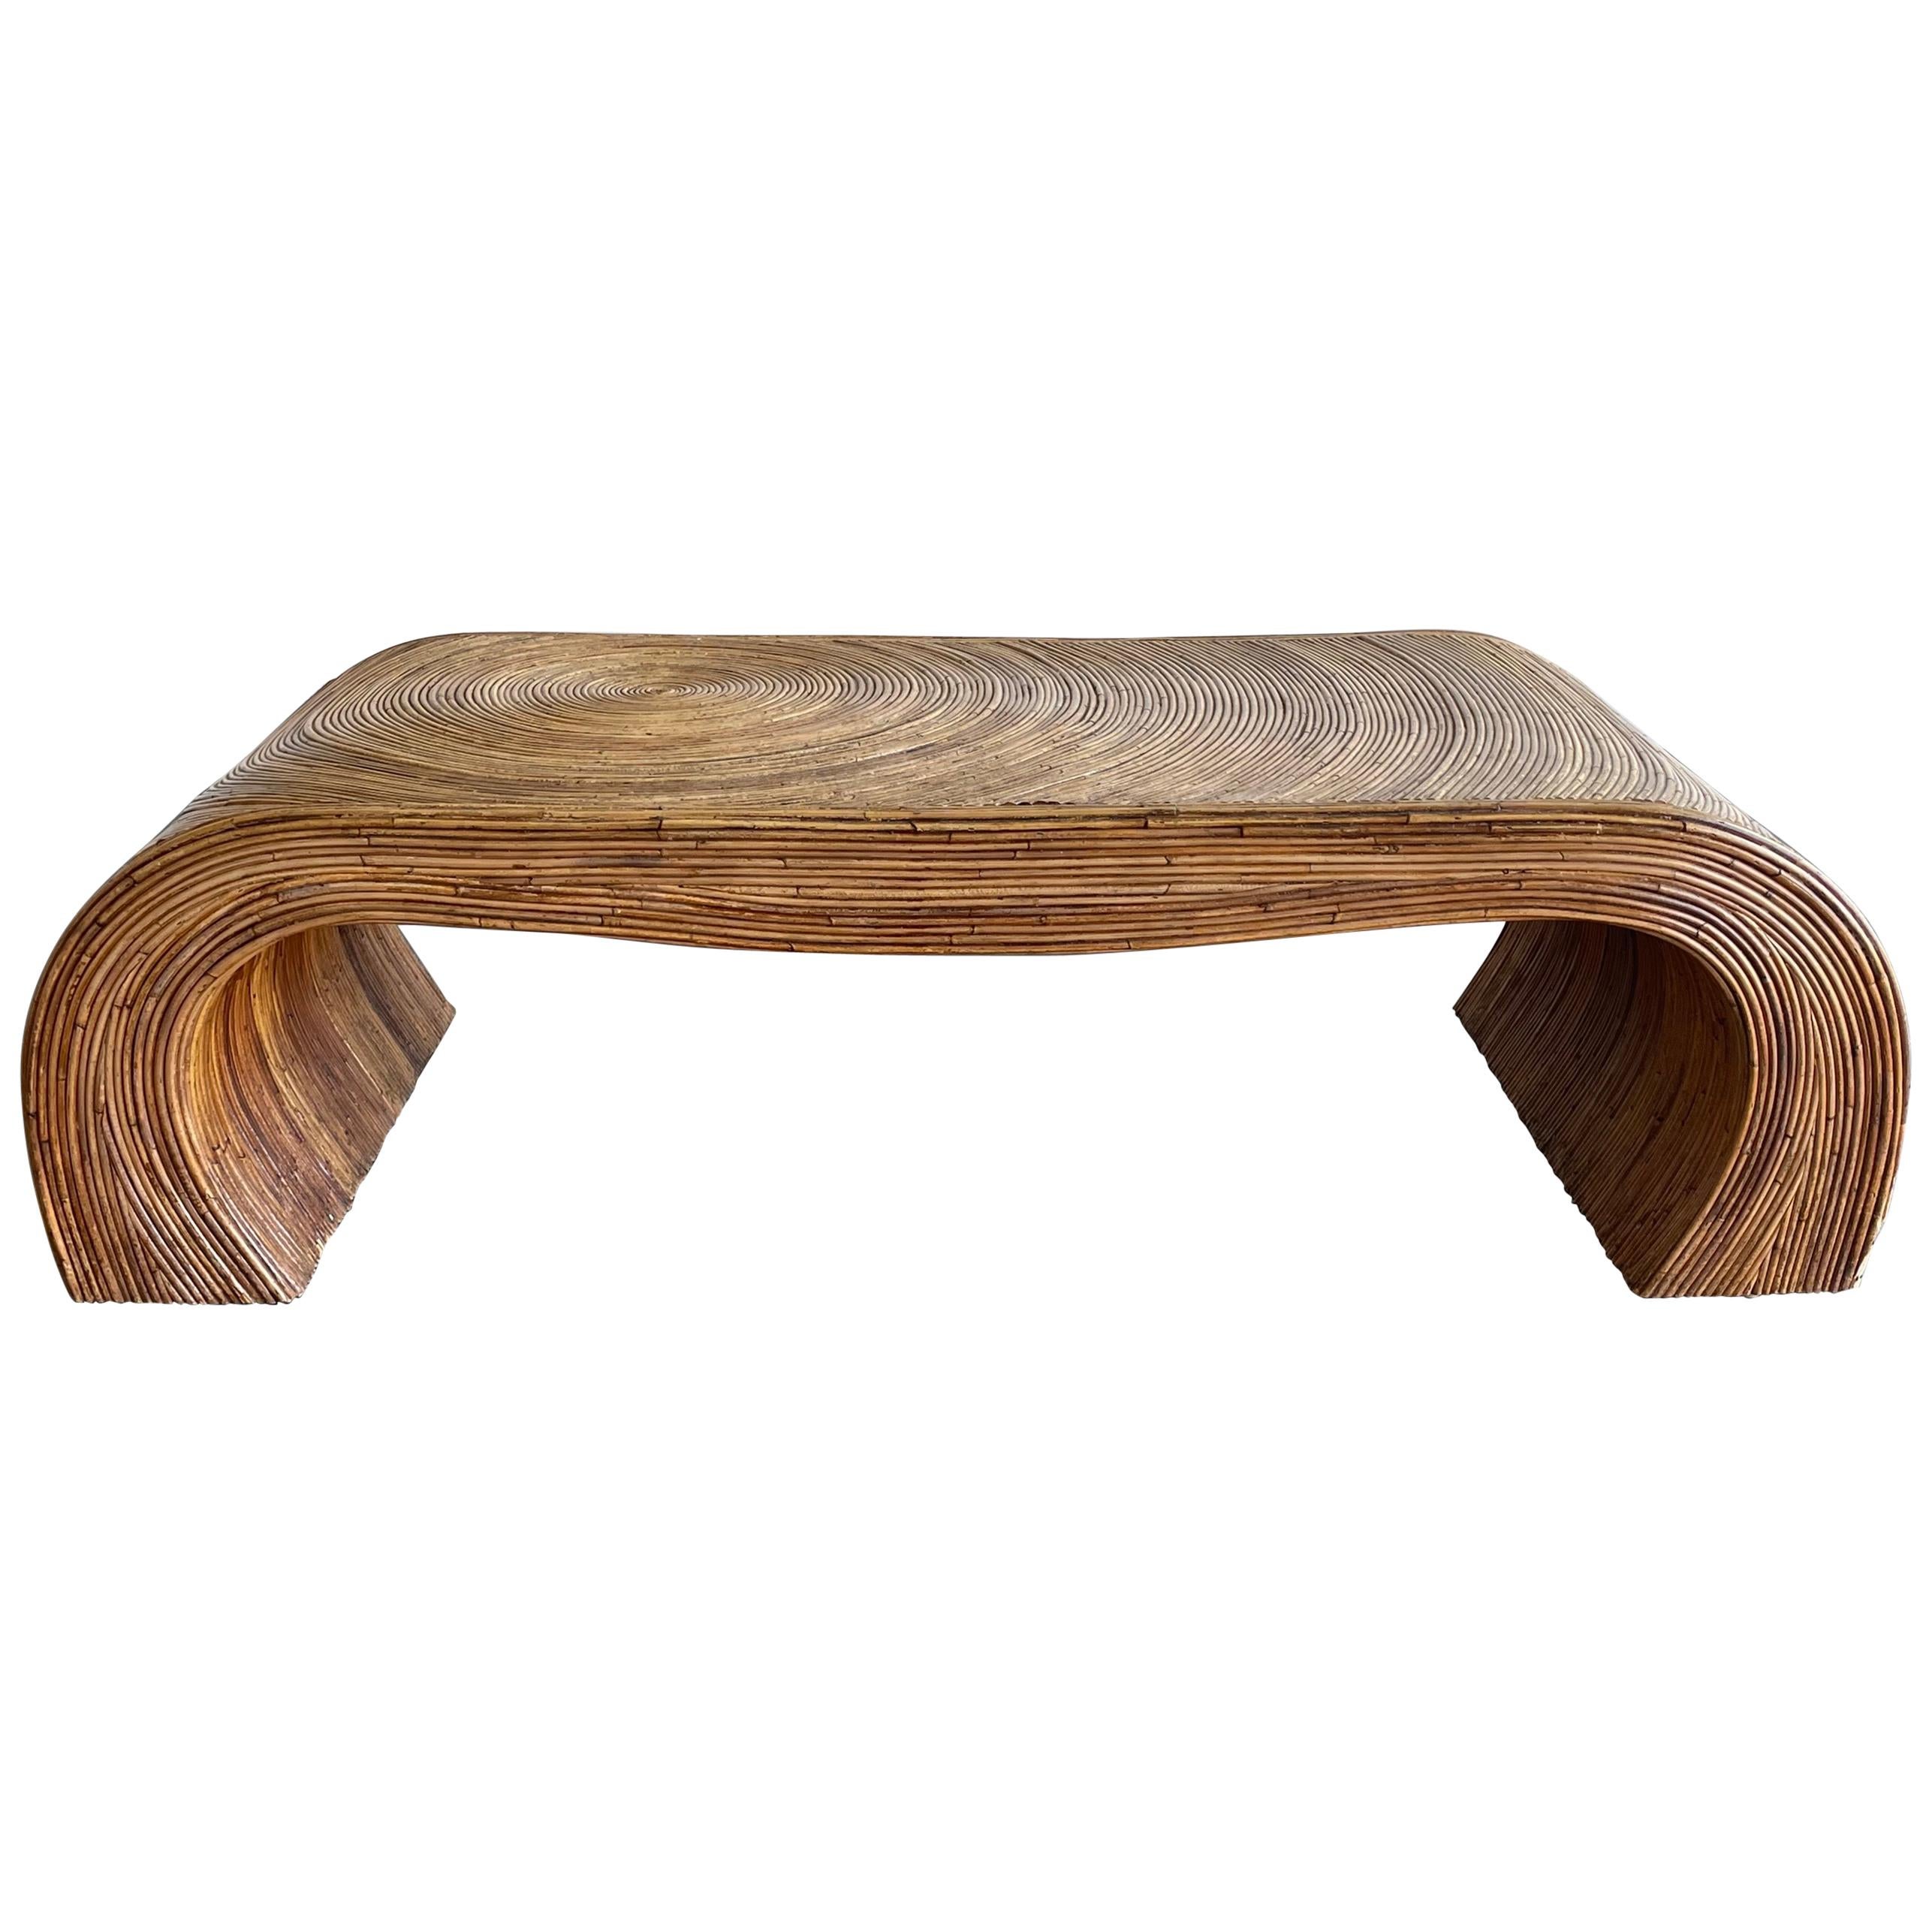 Pencil Reed Waterfall Coffee Table after Gabriella Crespi